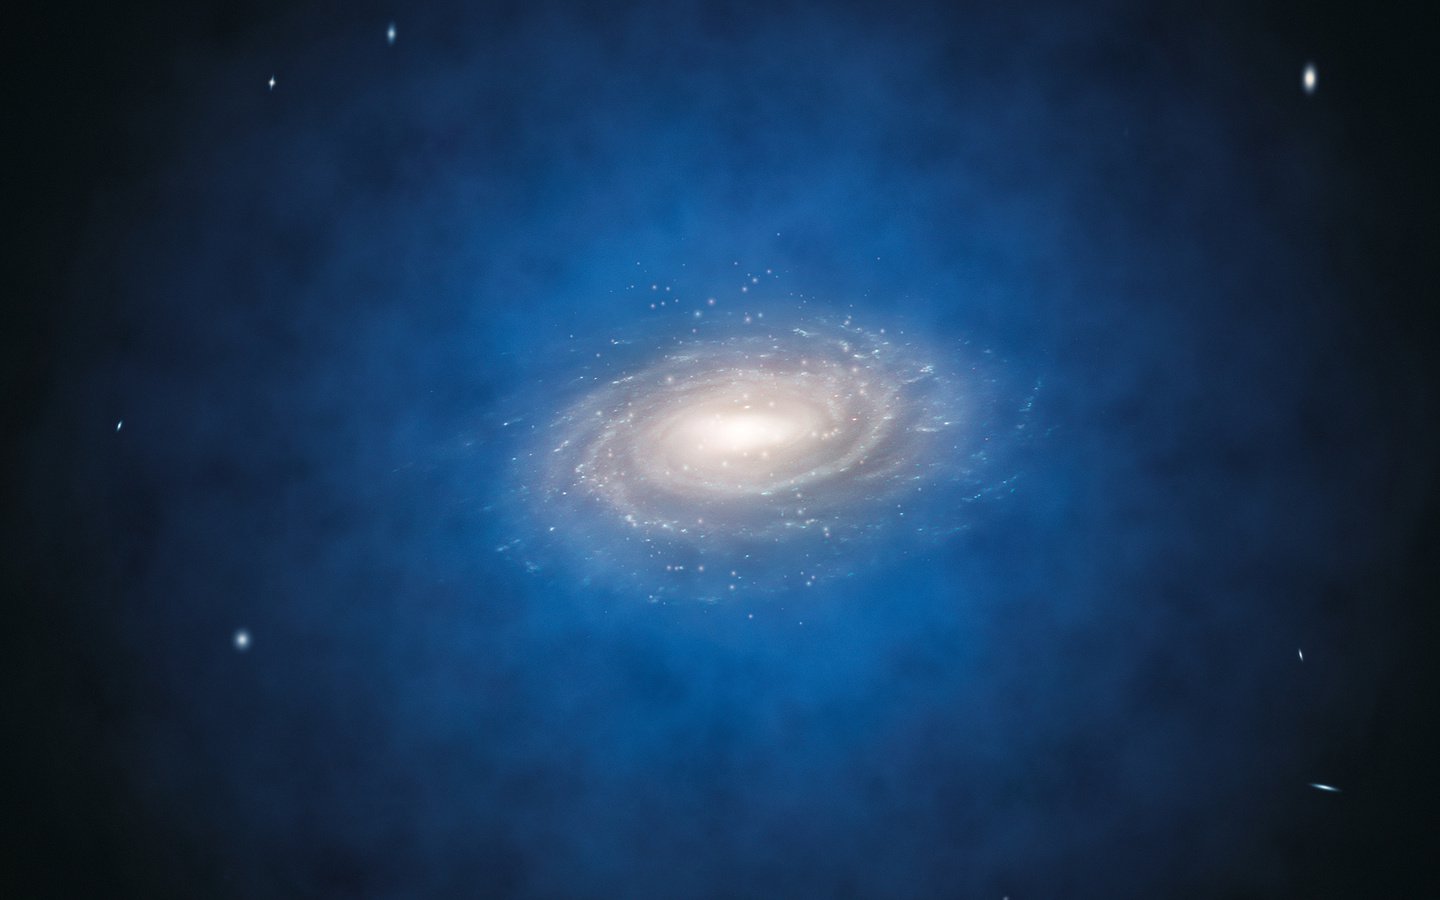 Scientists have found where the stars in the halo of the milky Way